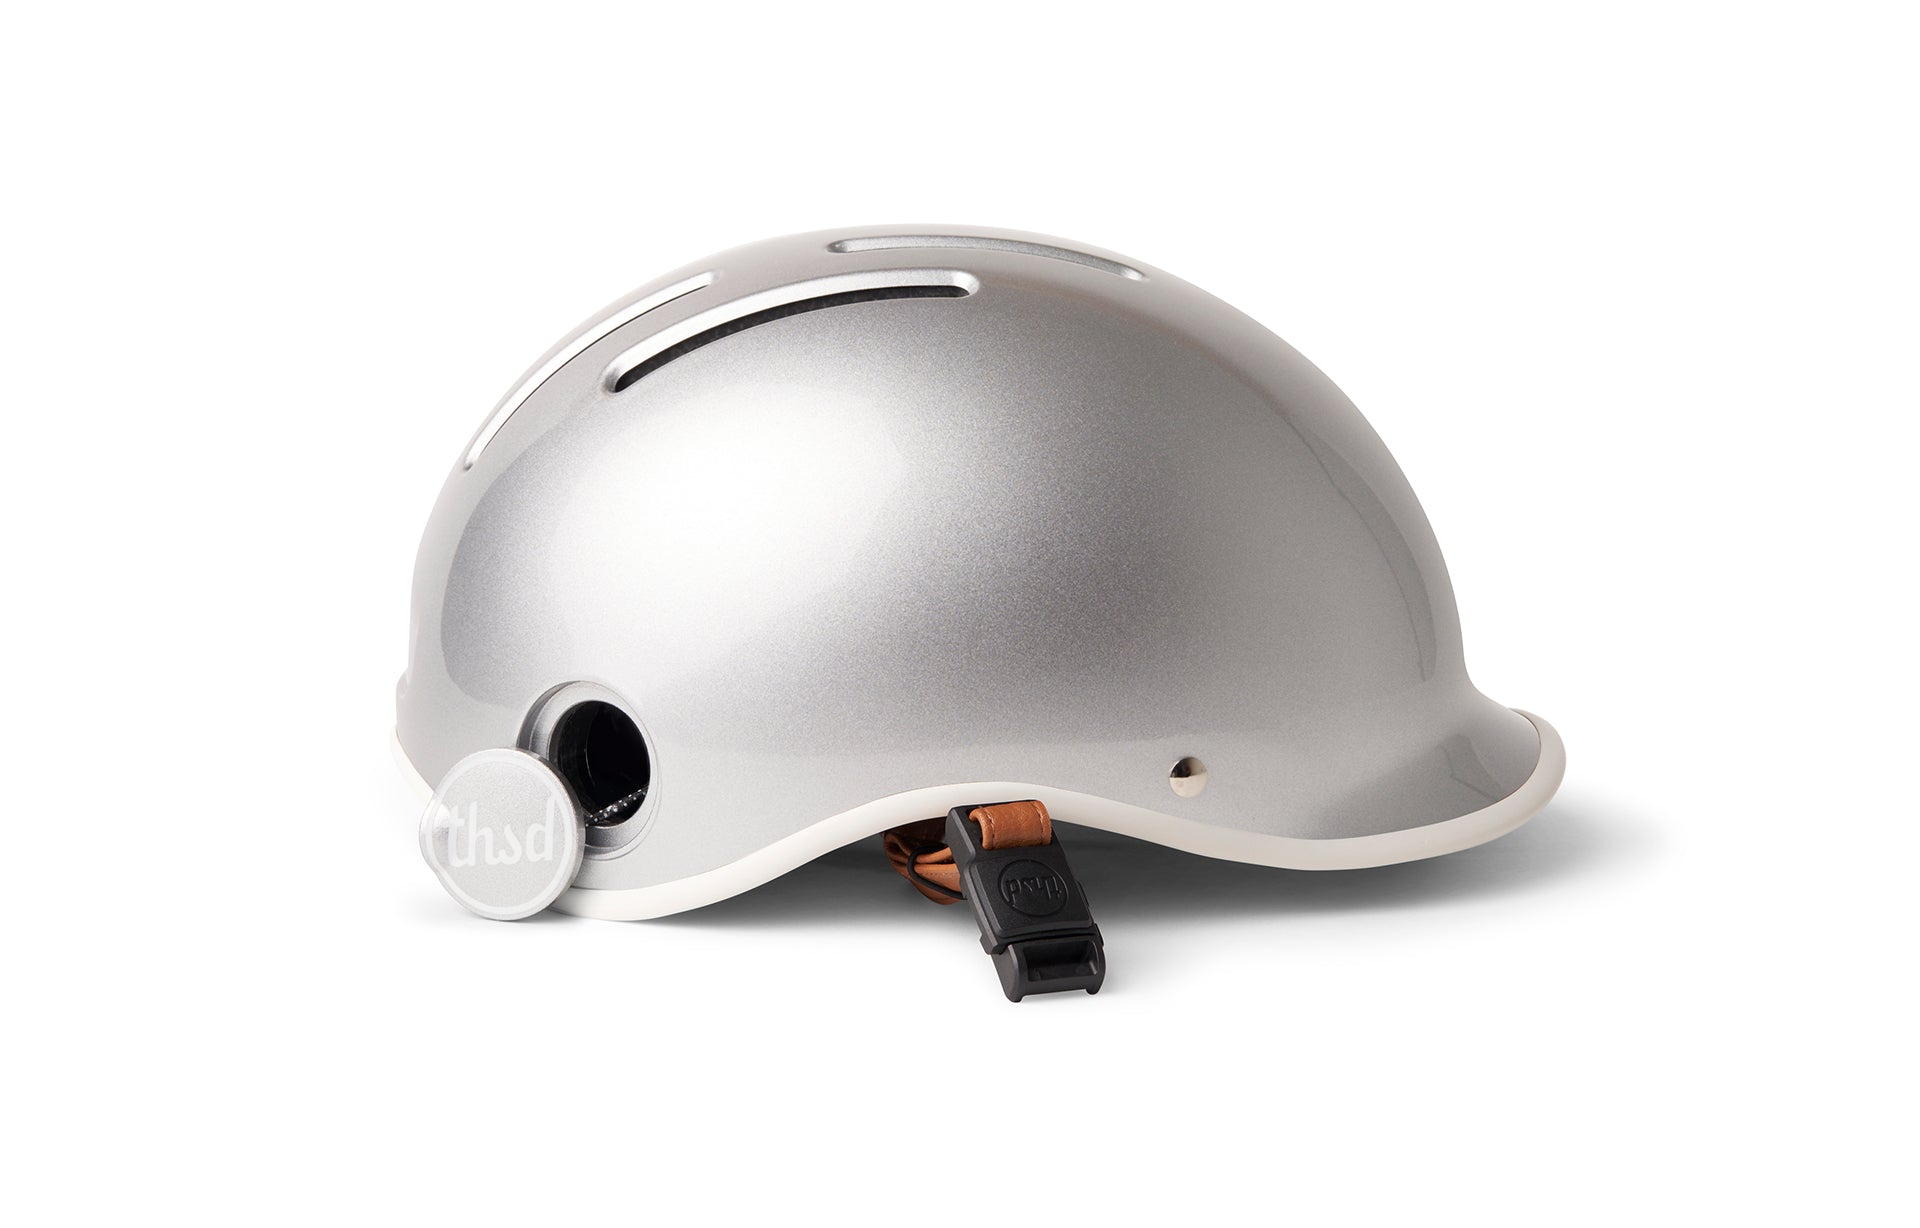 Thousand Heritage electric scooter helmet in so silver